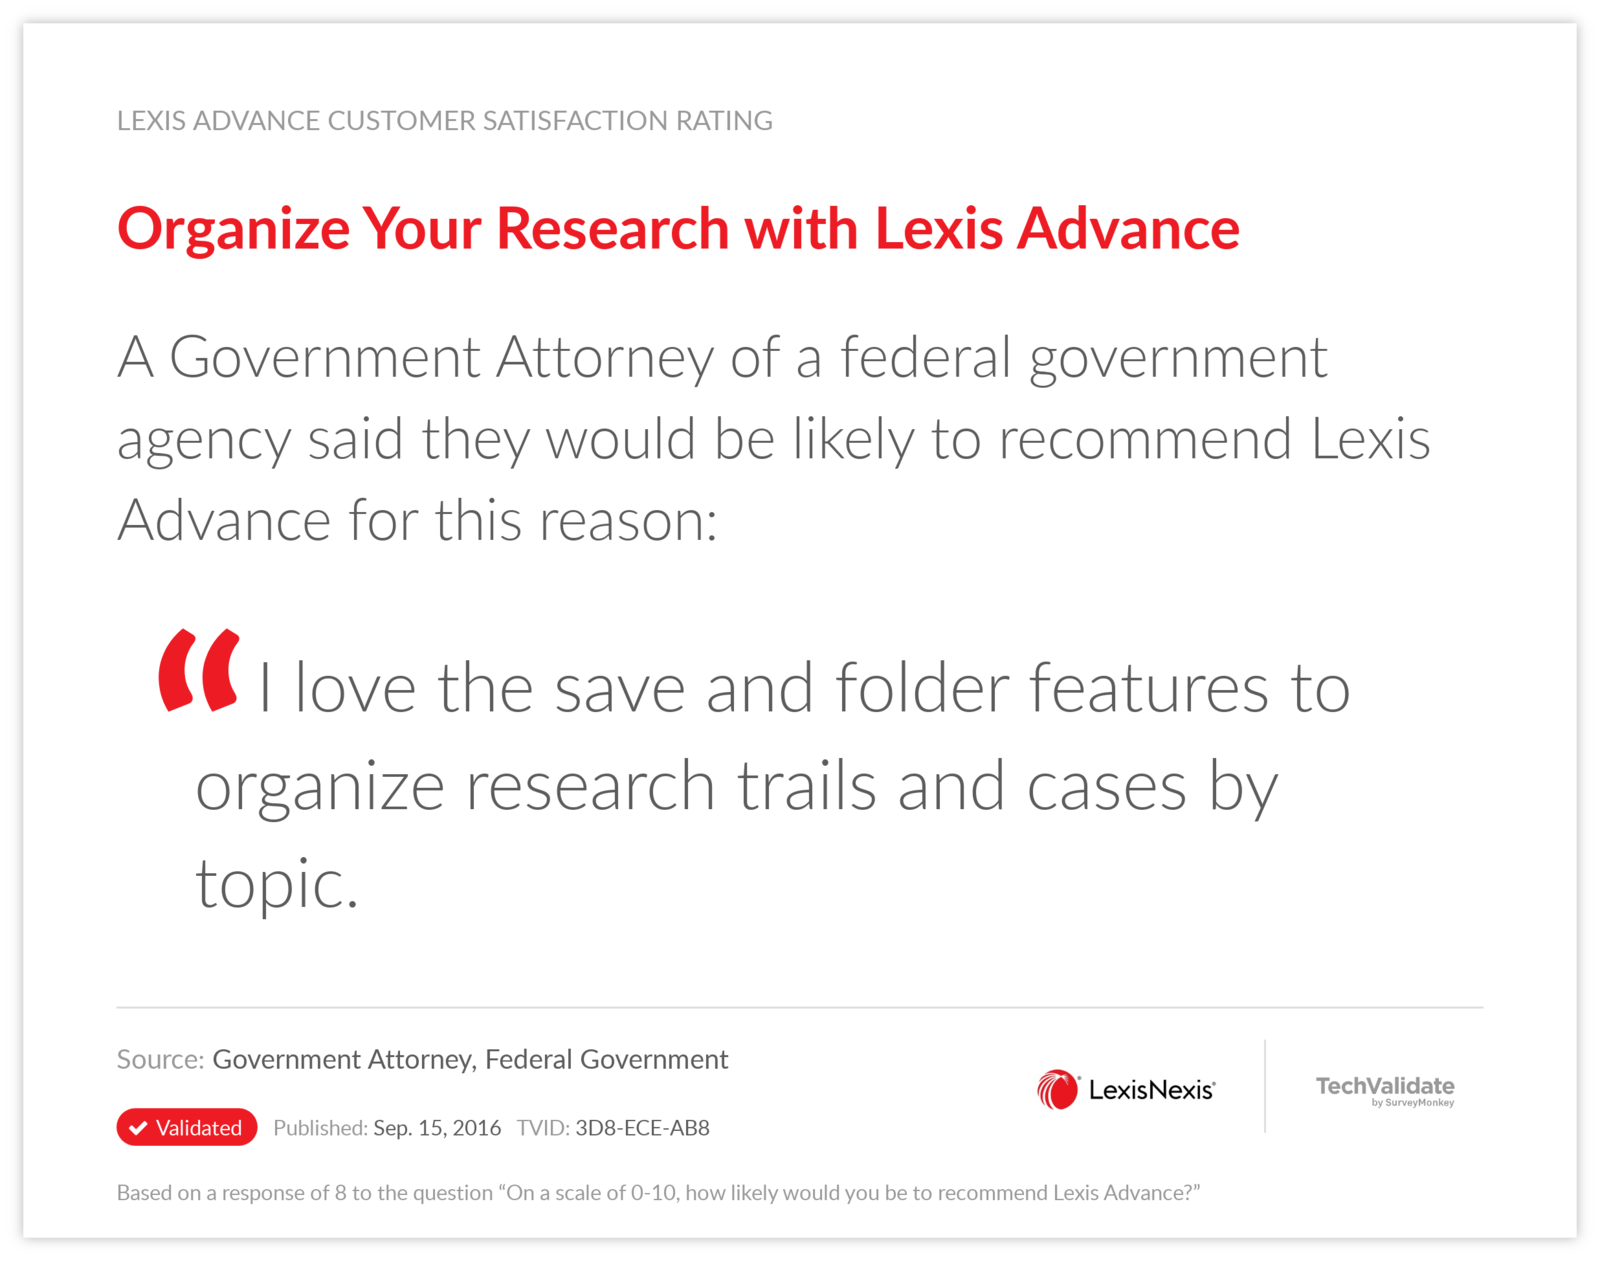 Organize Your Research with Lexis Advance